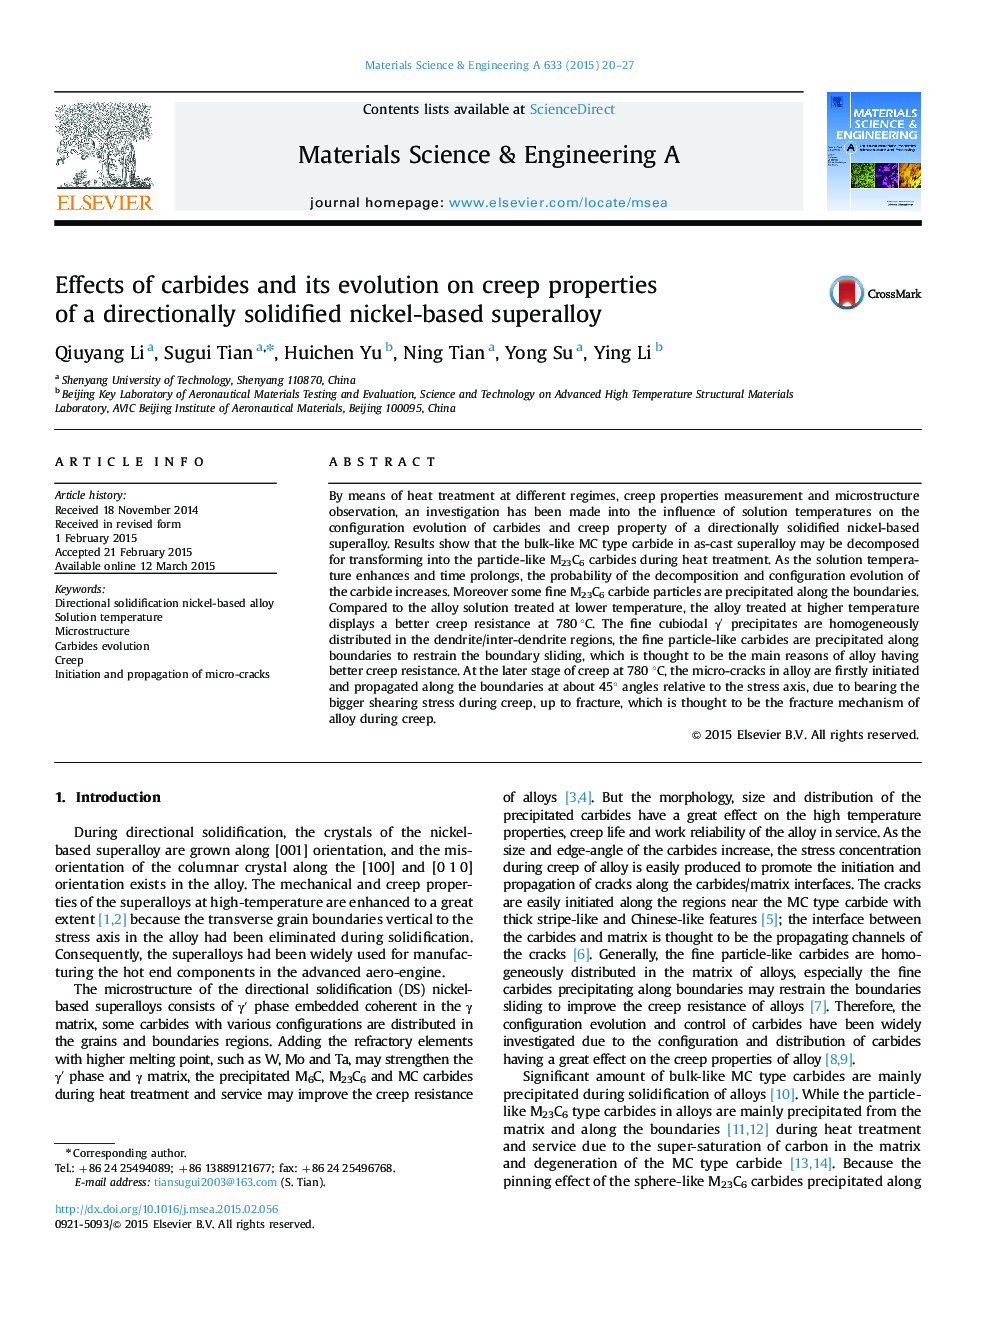 Effects of carbides and its evolution on creep properties of a directionally solidified nickel-based superalloy